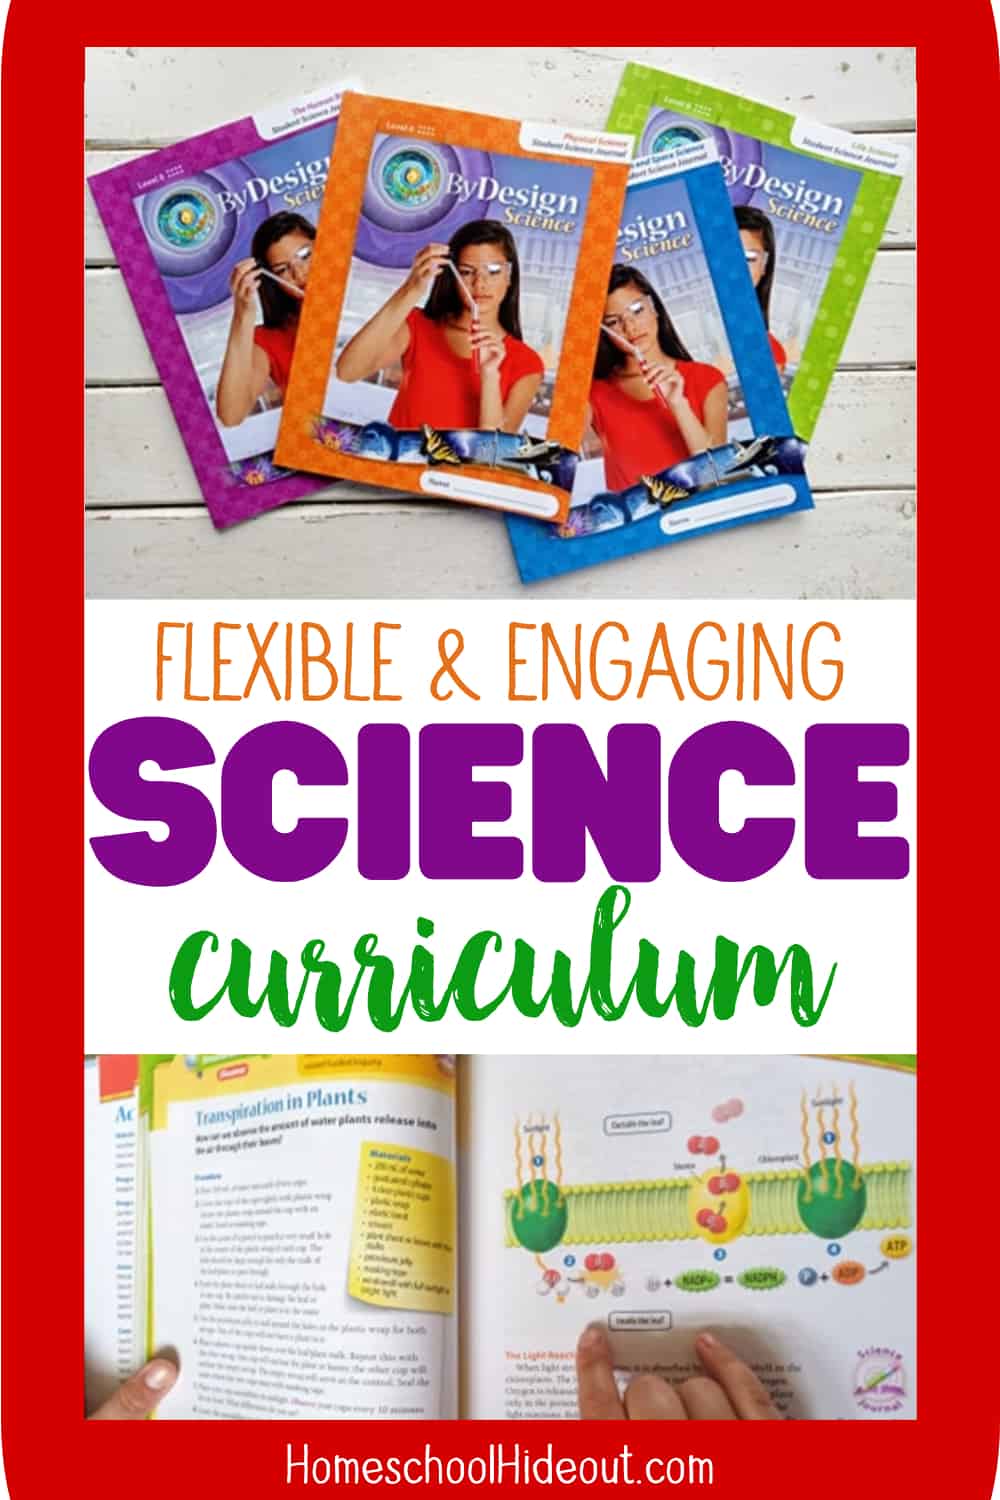 Kendall Hunt RPD has hit it out of the park with their enaging science curriculum, By Design! It's perfect for grades 1-8!